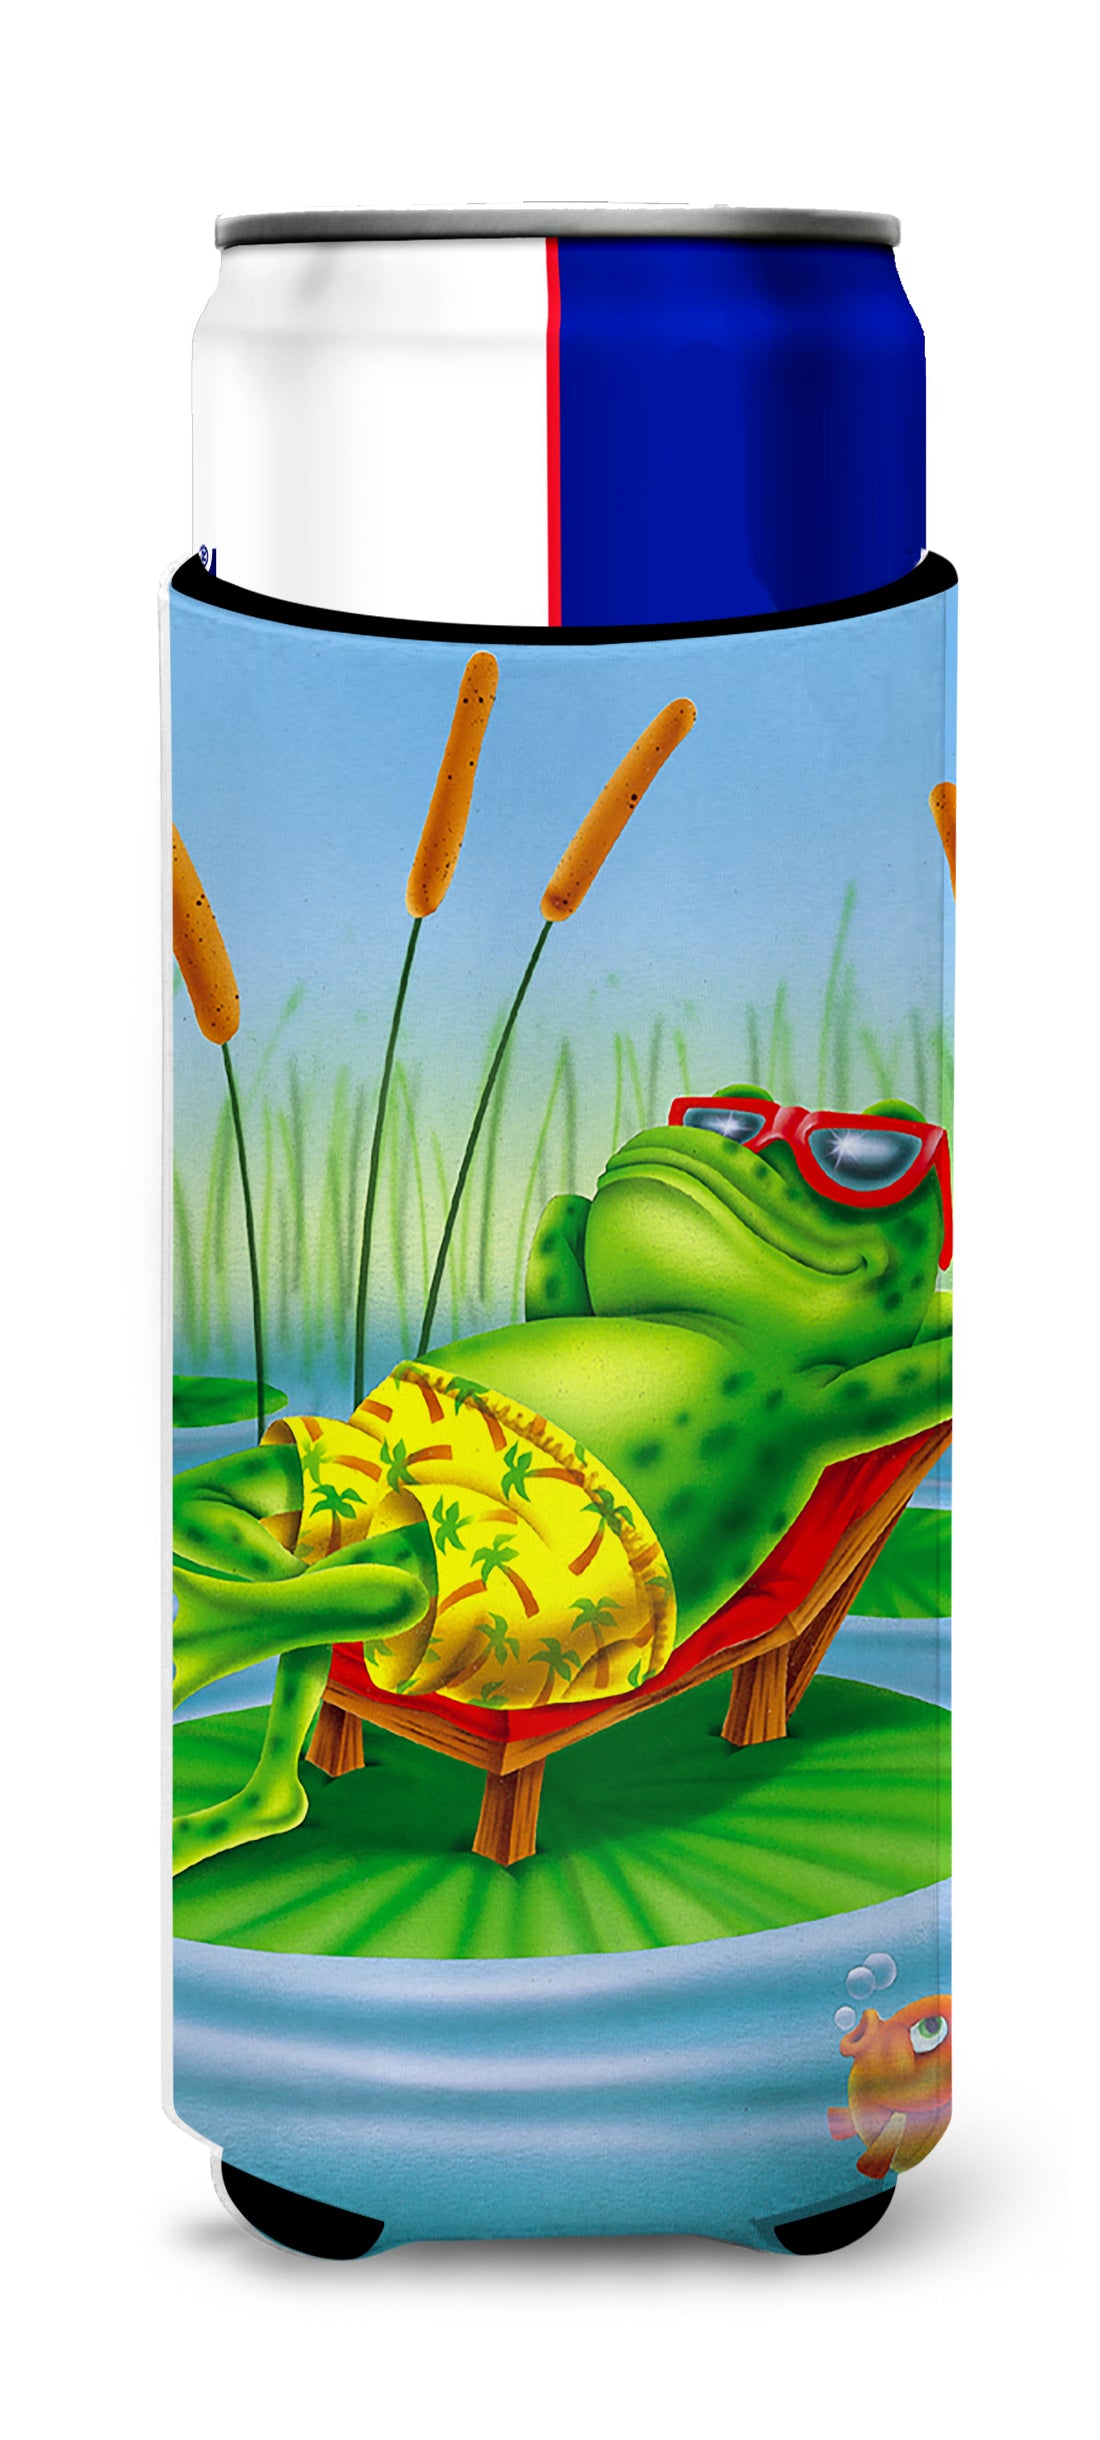 Frog Chilaxin on the Lilly Pad  Ultra Beverage Insulators for slim cans APH0521MUK